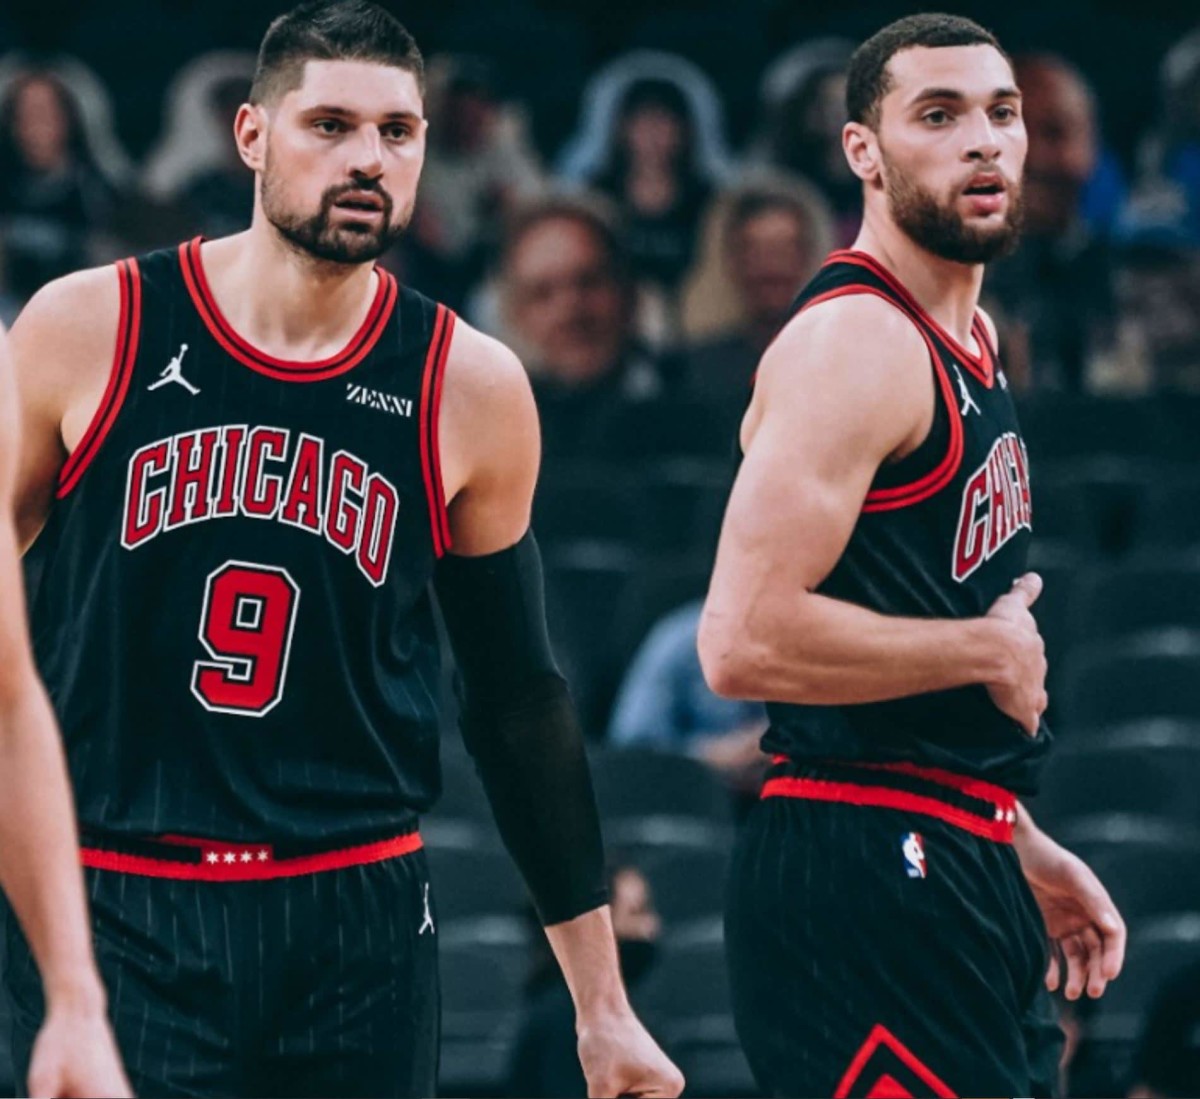 Despite the loss, the Bulls finally saw two All-Stars suit up together on Saturday night in San Antonio.Photo: Chicago Bulls/Twitter